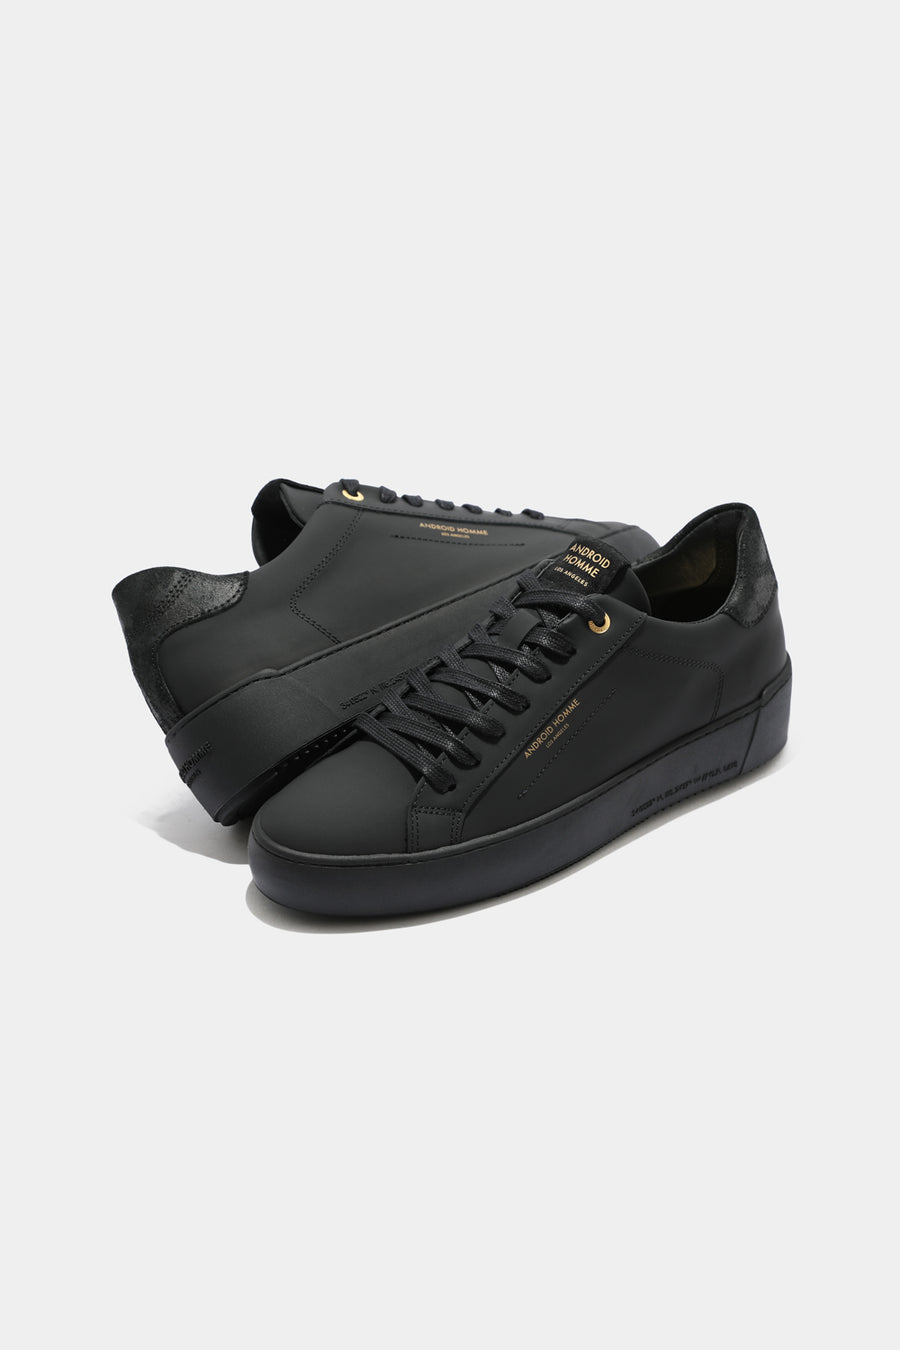 Buy the Android Homme Zuma Black Gomma Camo Sneaker at Intro. Spend £50 for free UK delivery. Official stockists. We ship worldwide.